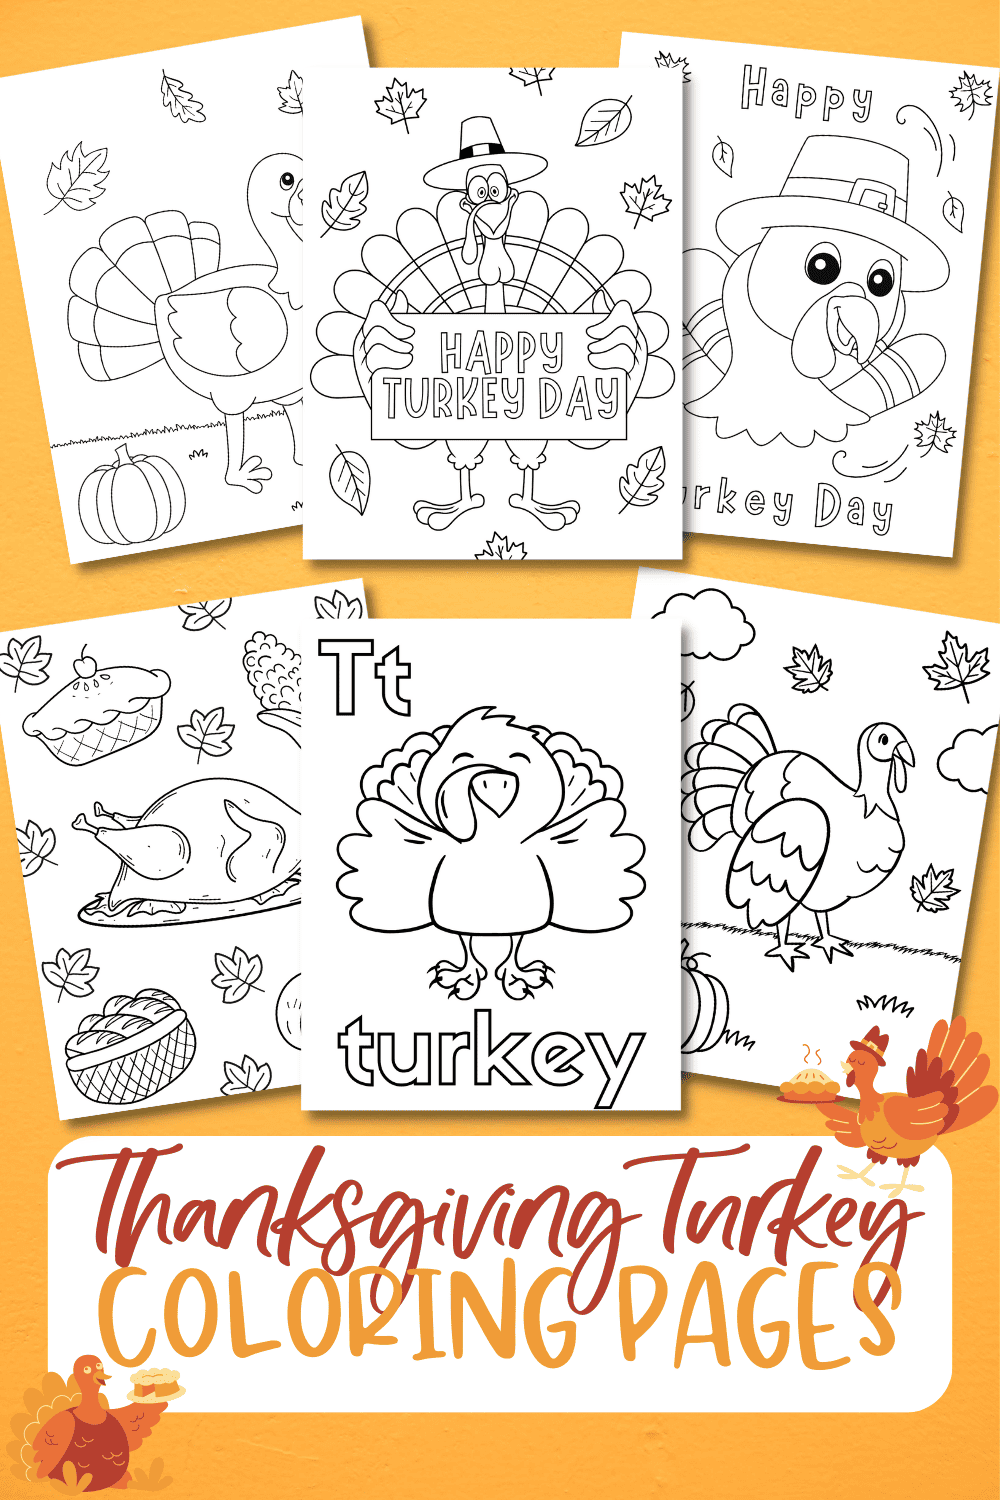 coloring pages free turkeys